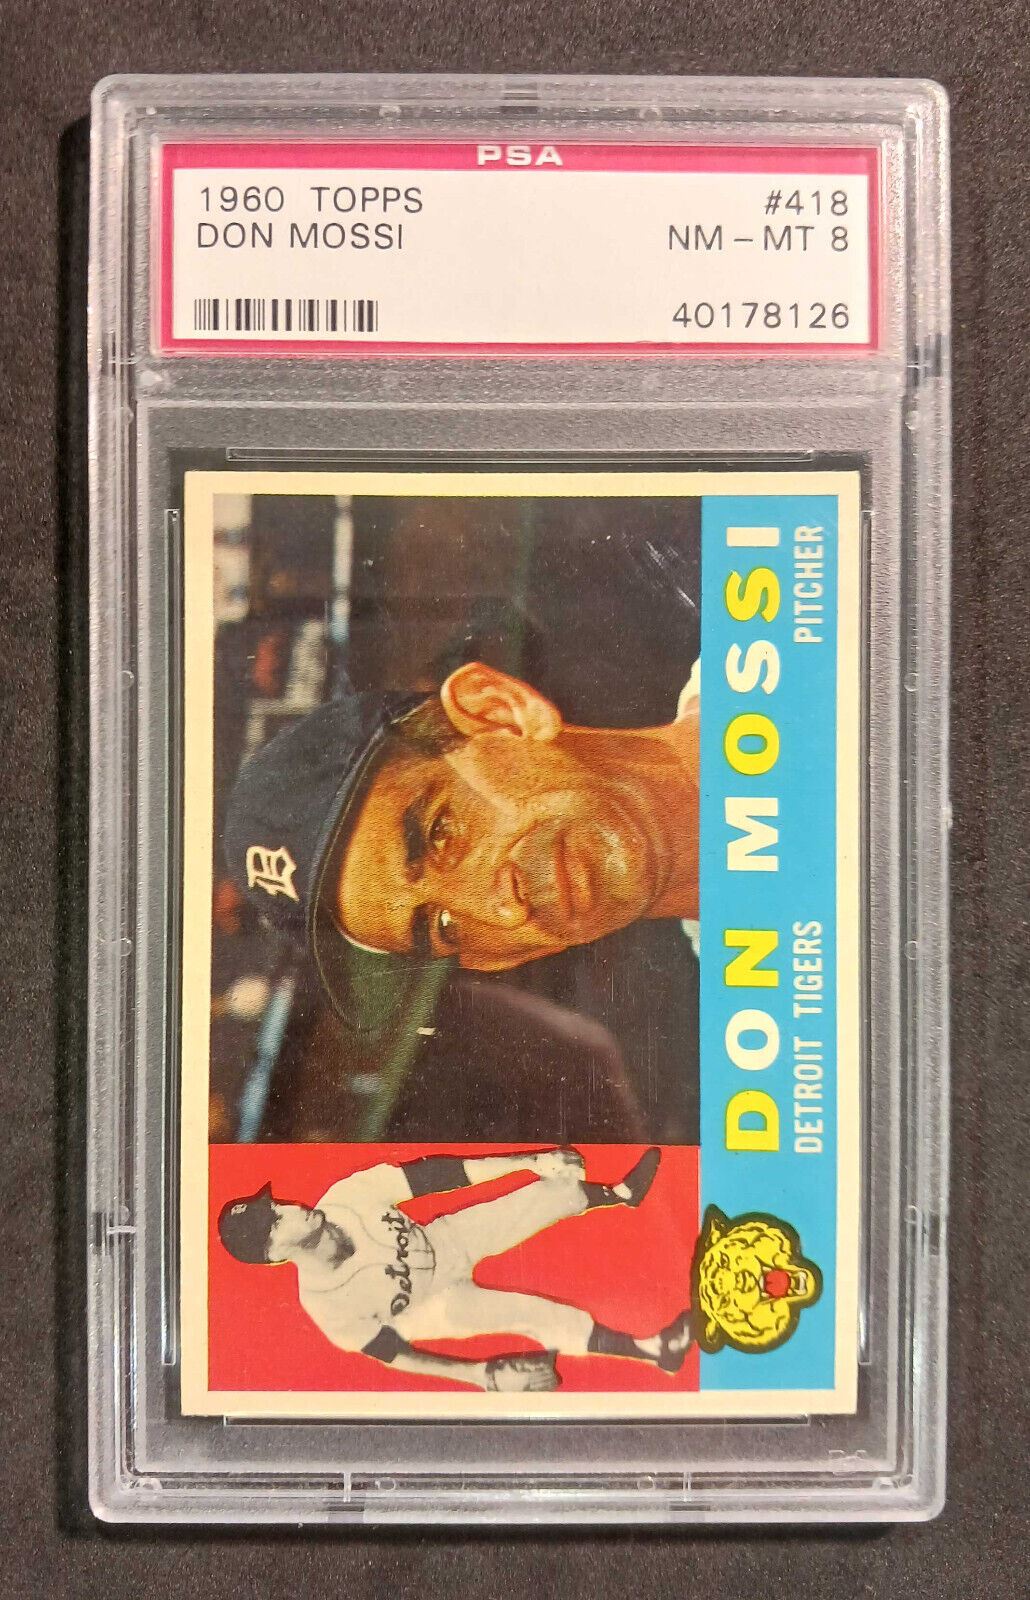 1960 Topps Don Mossi #418 PSA NM-MT 8 Serial 40178126